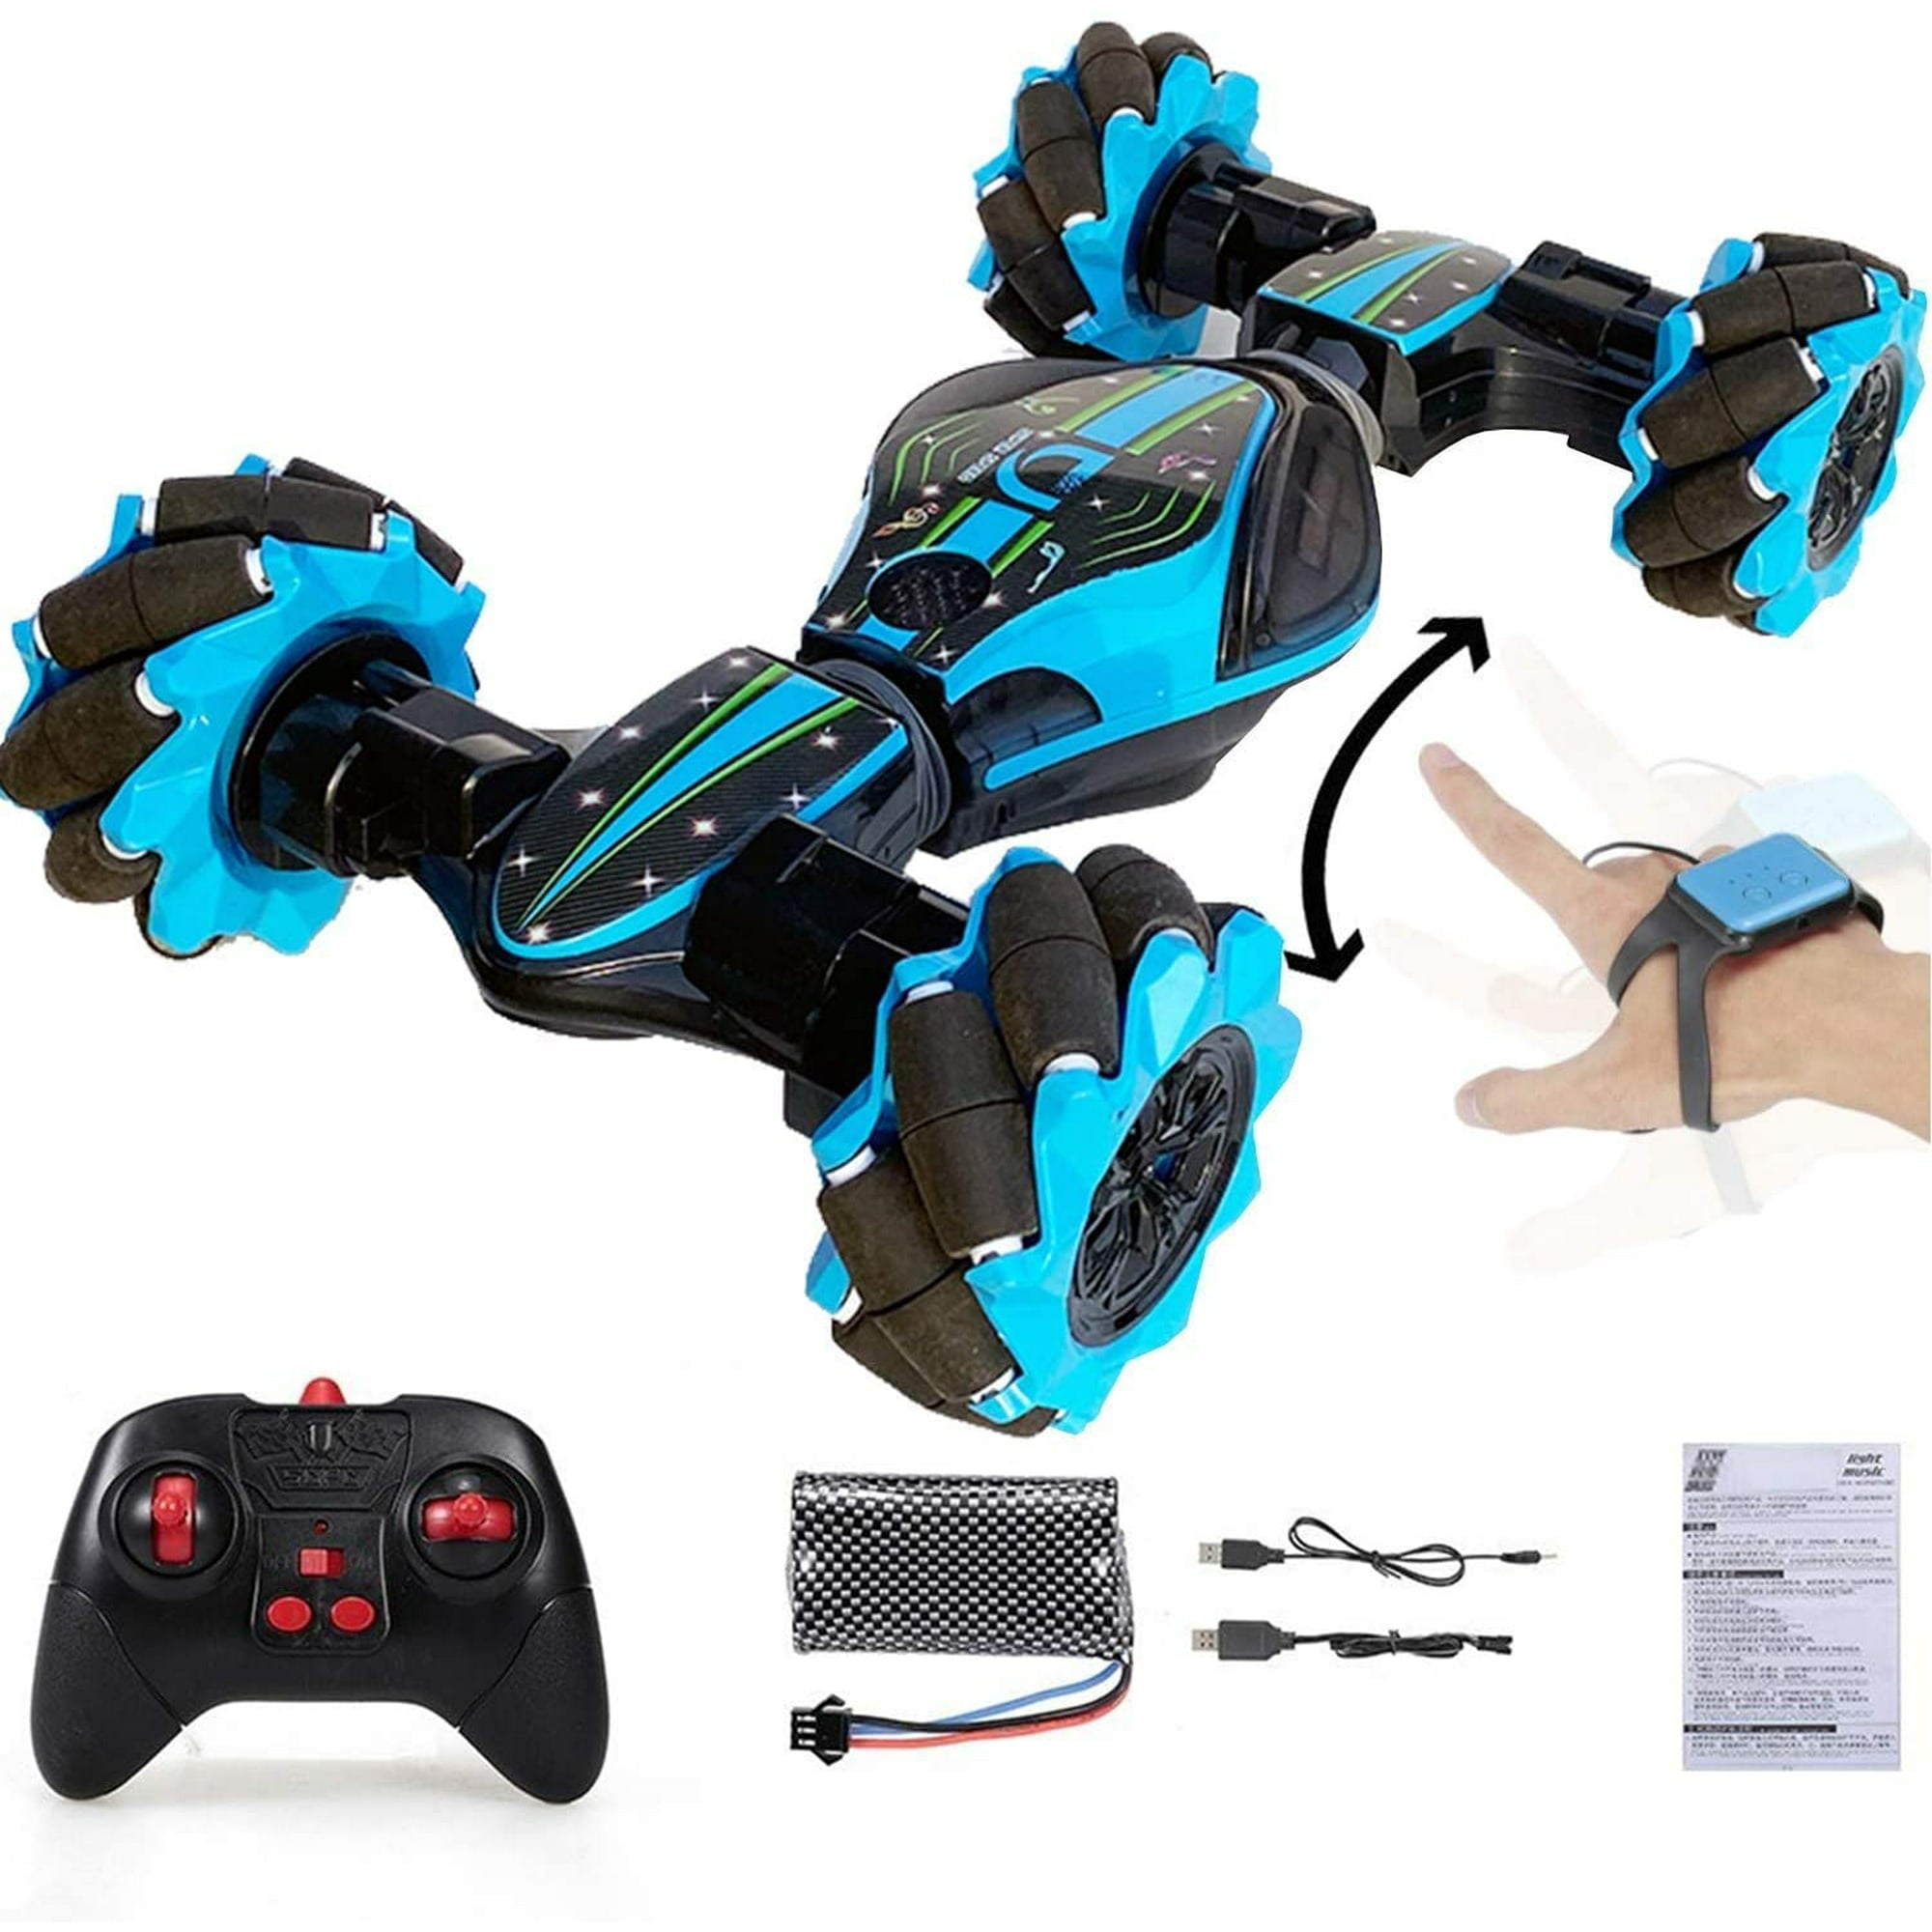 Terra RC Stunt Gesture Sensing Climbing .Car for Kids with Off-Road, Sports Mode, 40 Min Standby Suitable for Any Terrain, 2.4G Gesture Controlled Double-Sided Remote-Control Toy | Blue